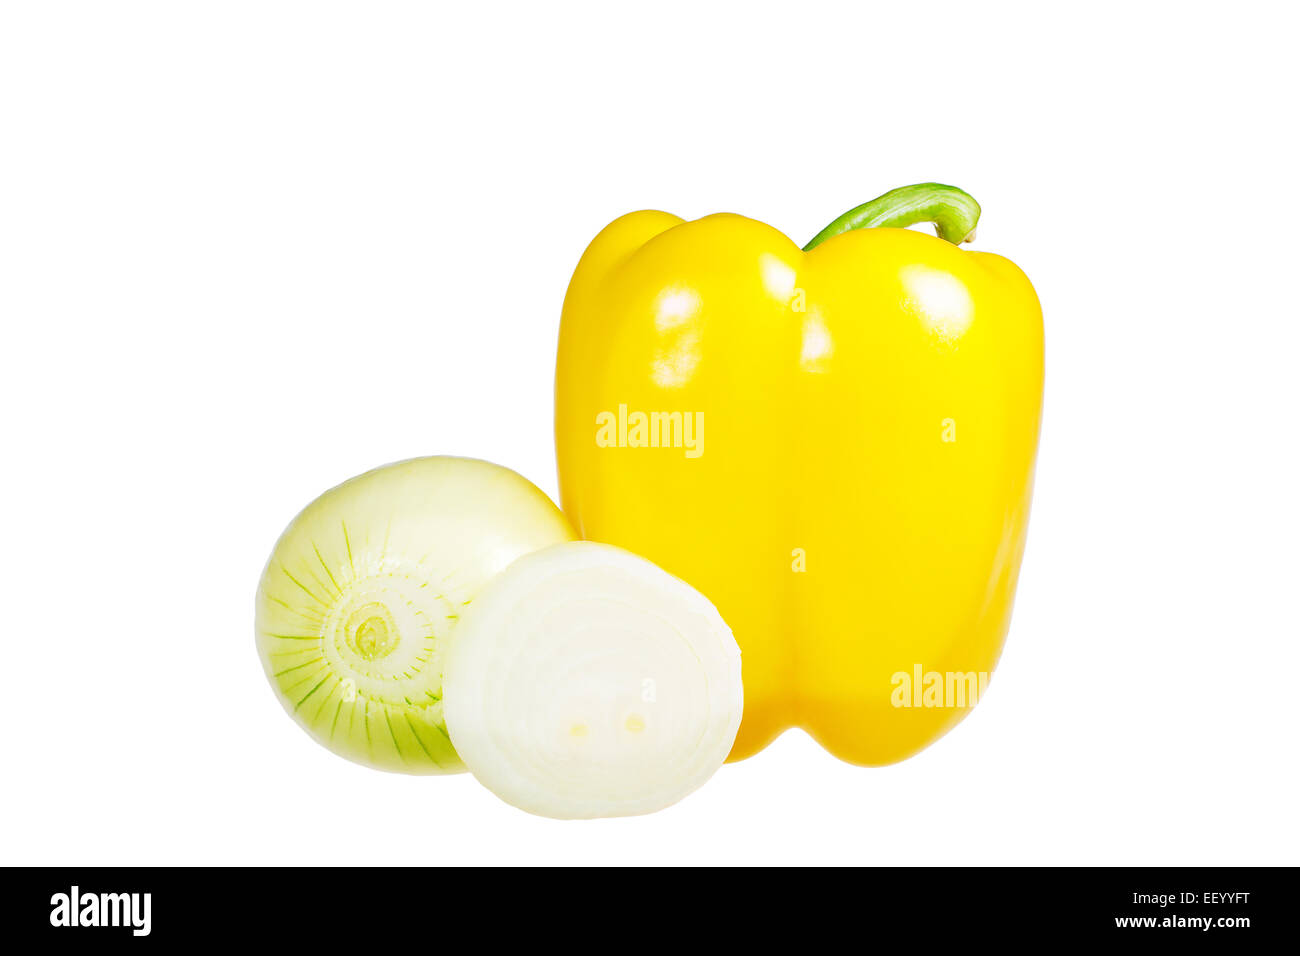 Vegetables (peppers and yellow onion) respectively. Stock Photo